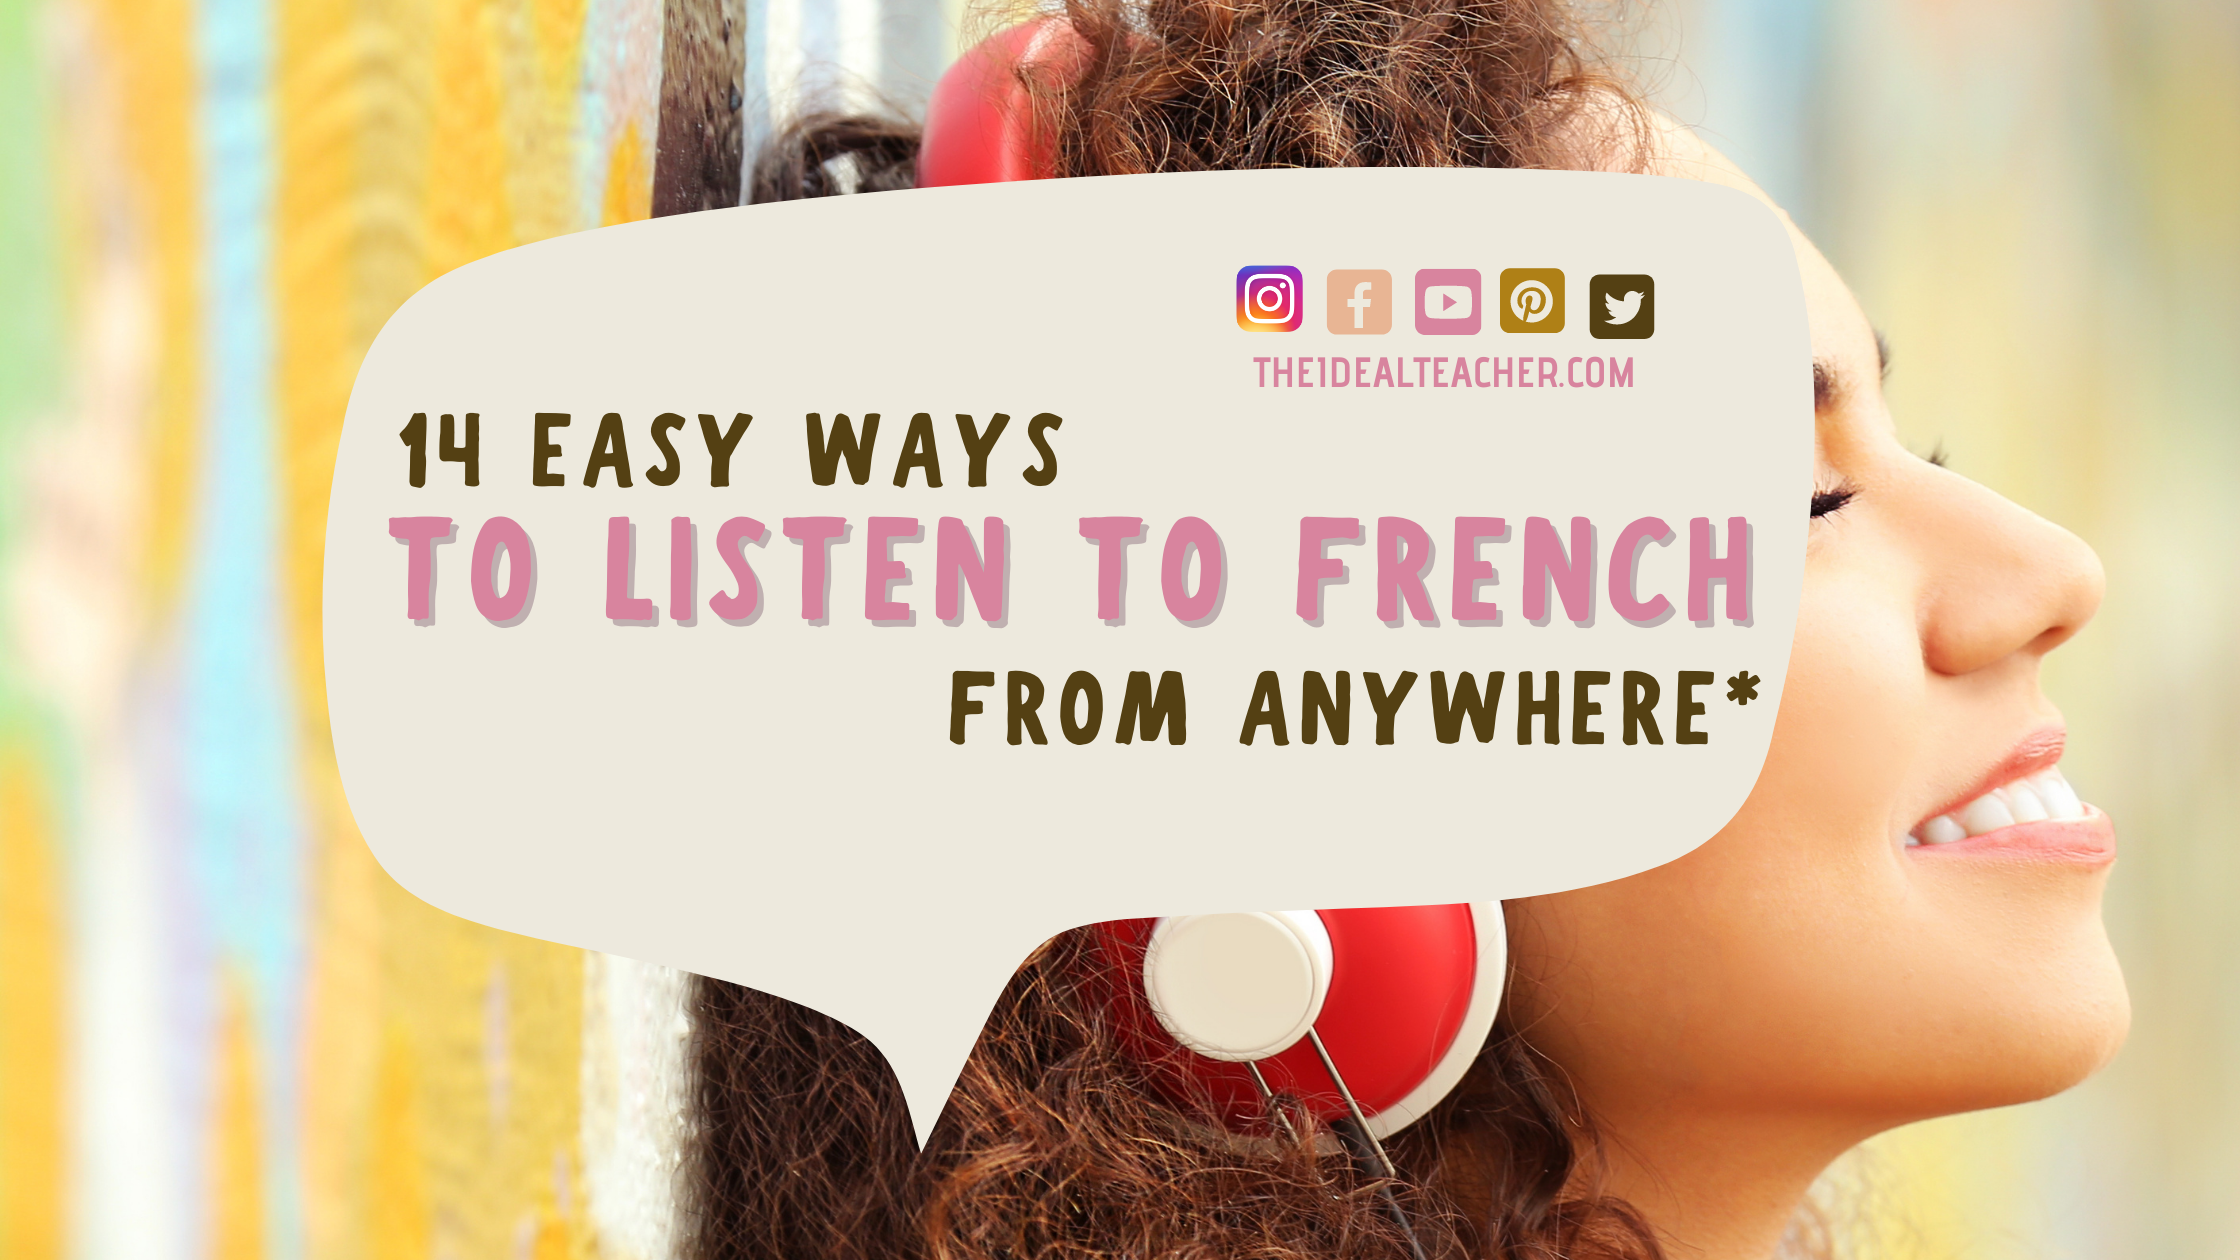 14 Easy Ways To Listen To French From Anywhere*